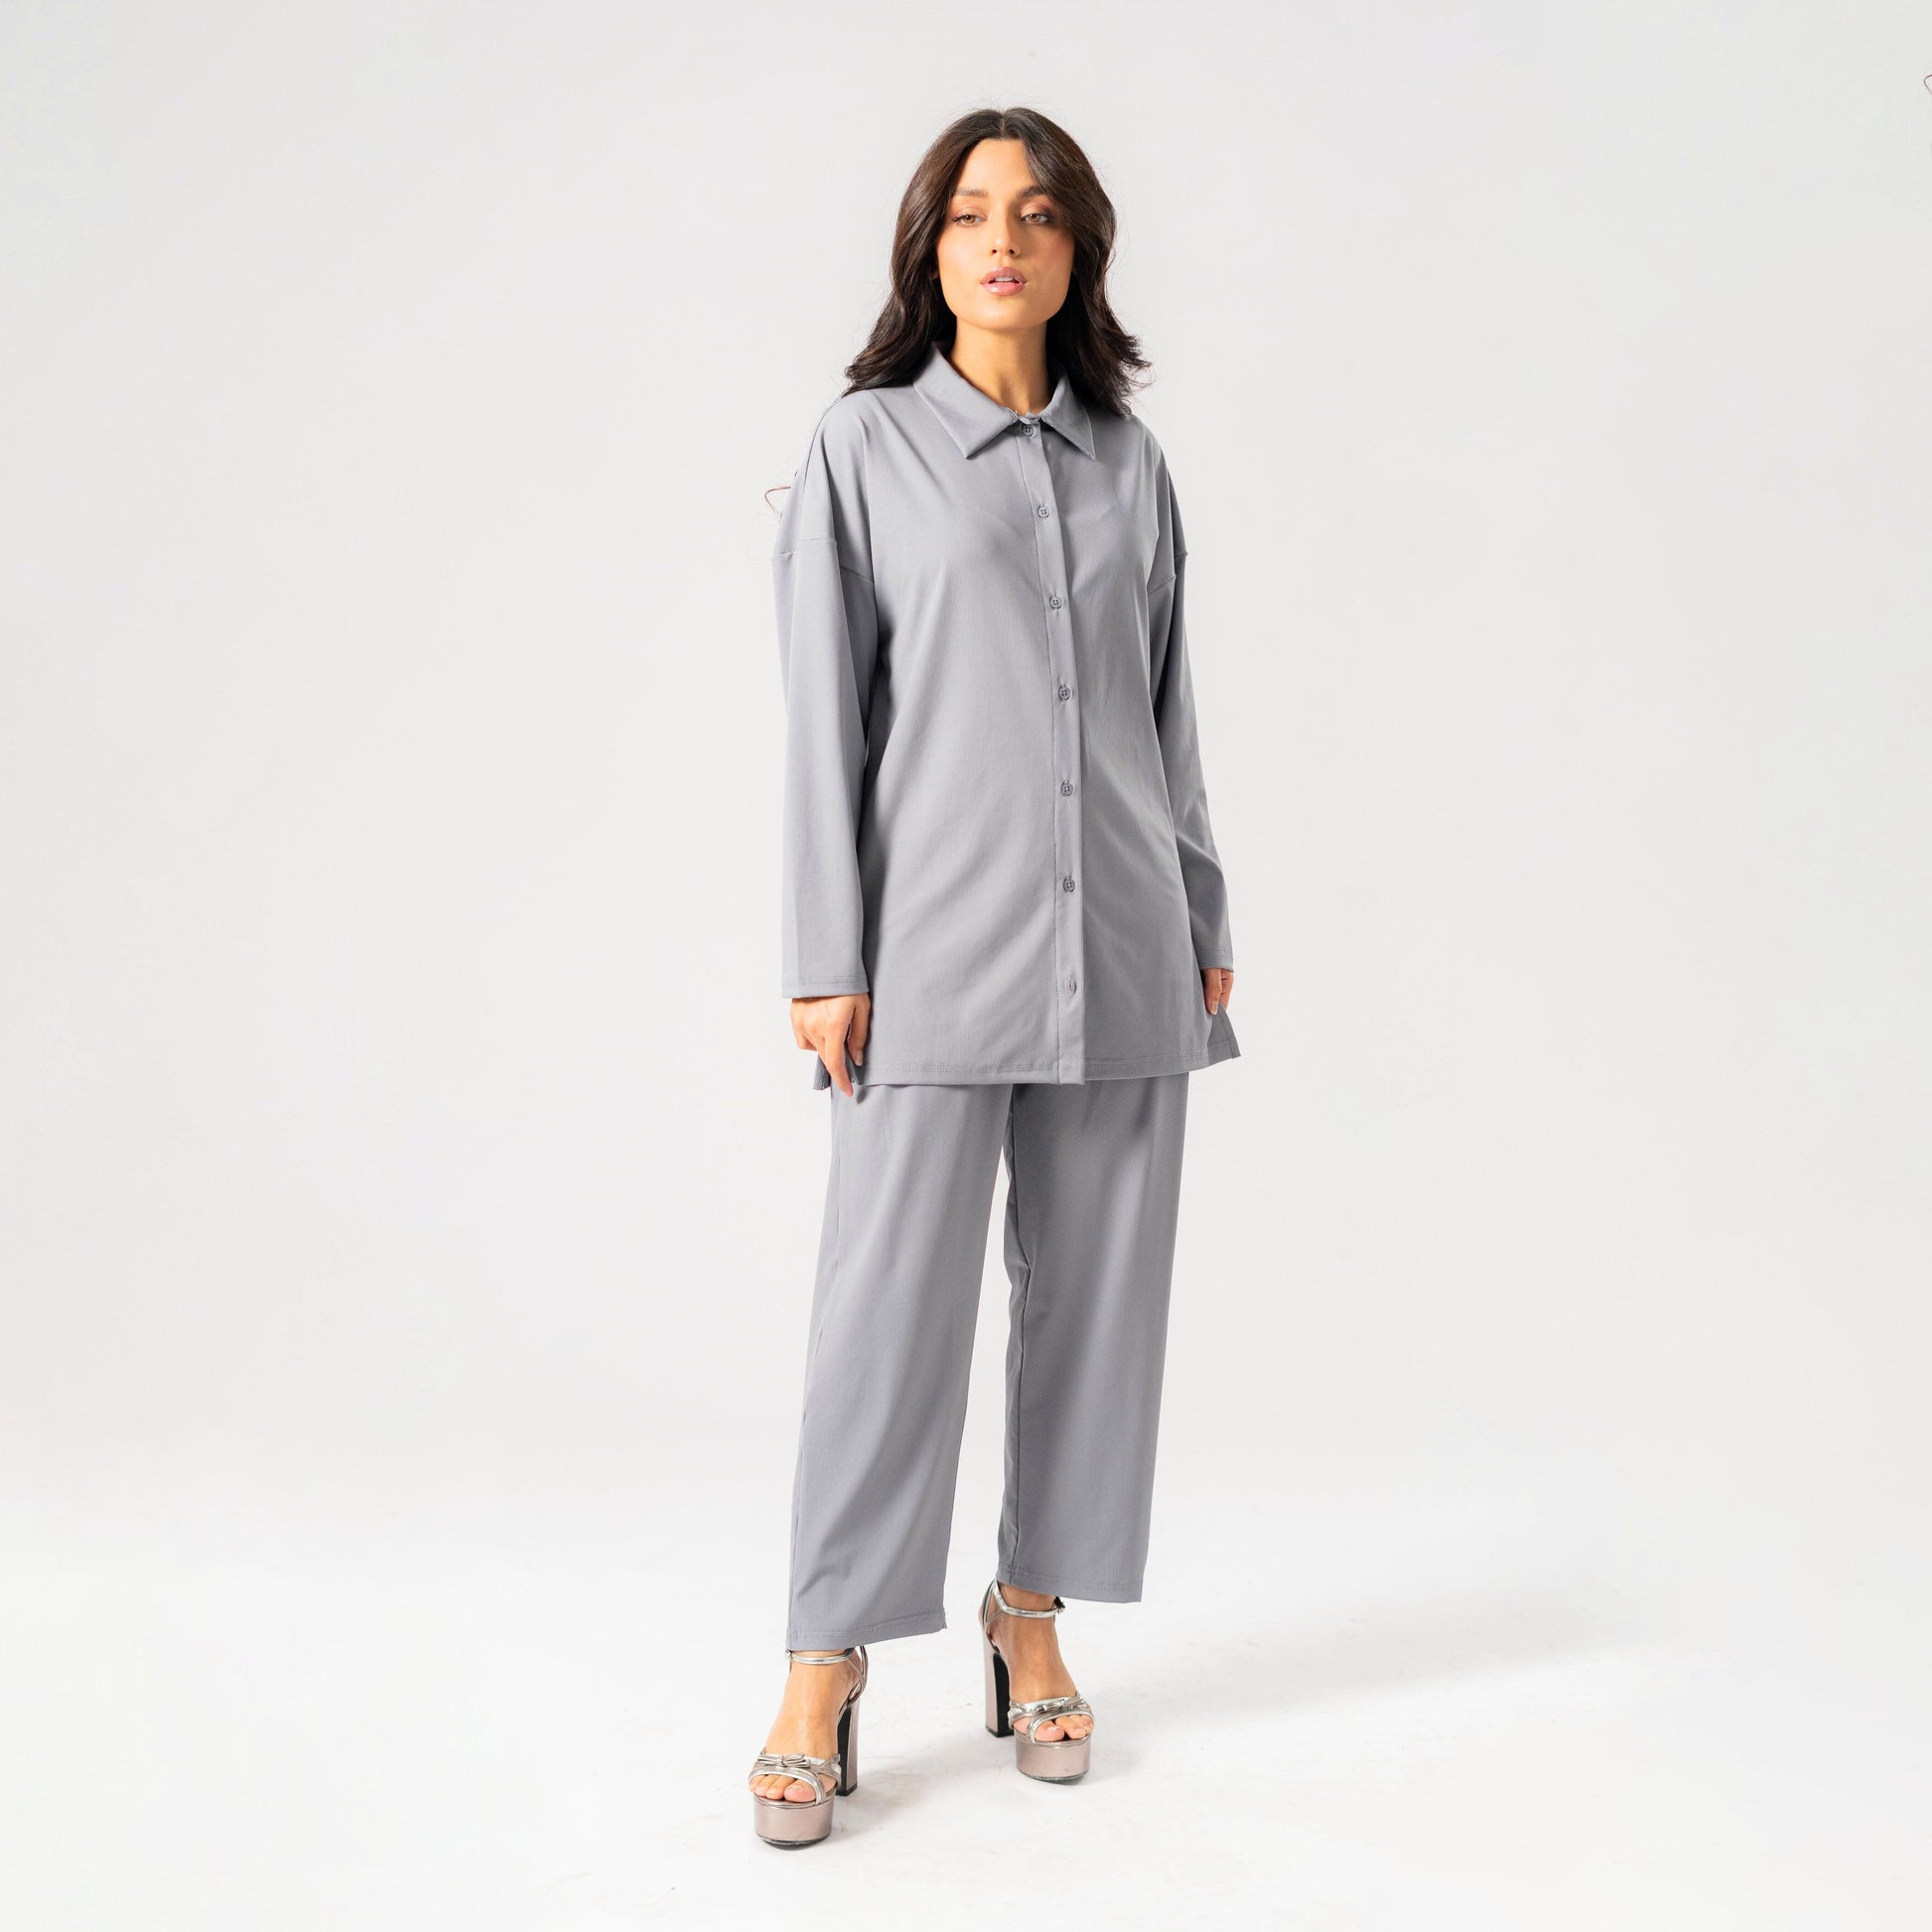 East West Women's Knitted Co-Ord Set Women's Co Ord Set East West Grey S 